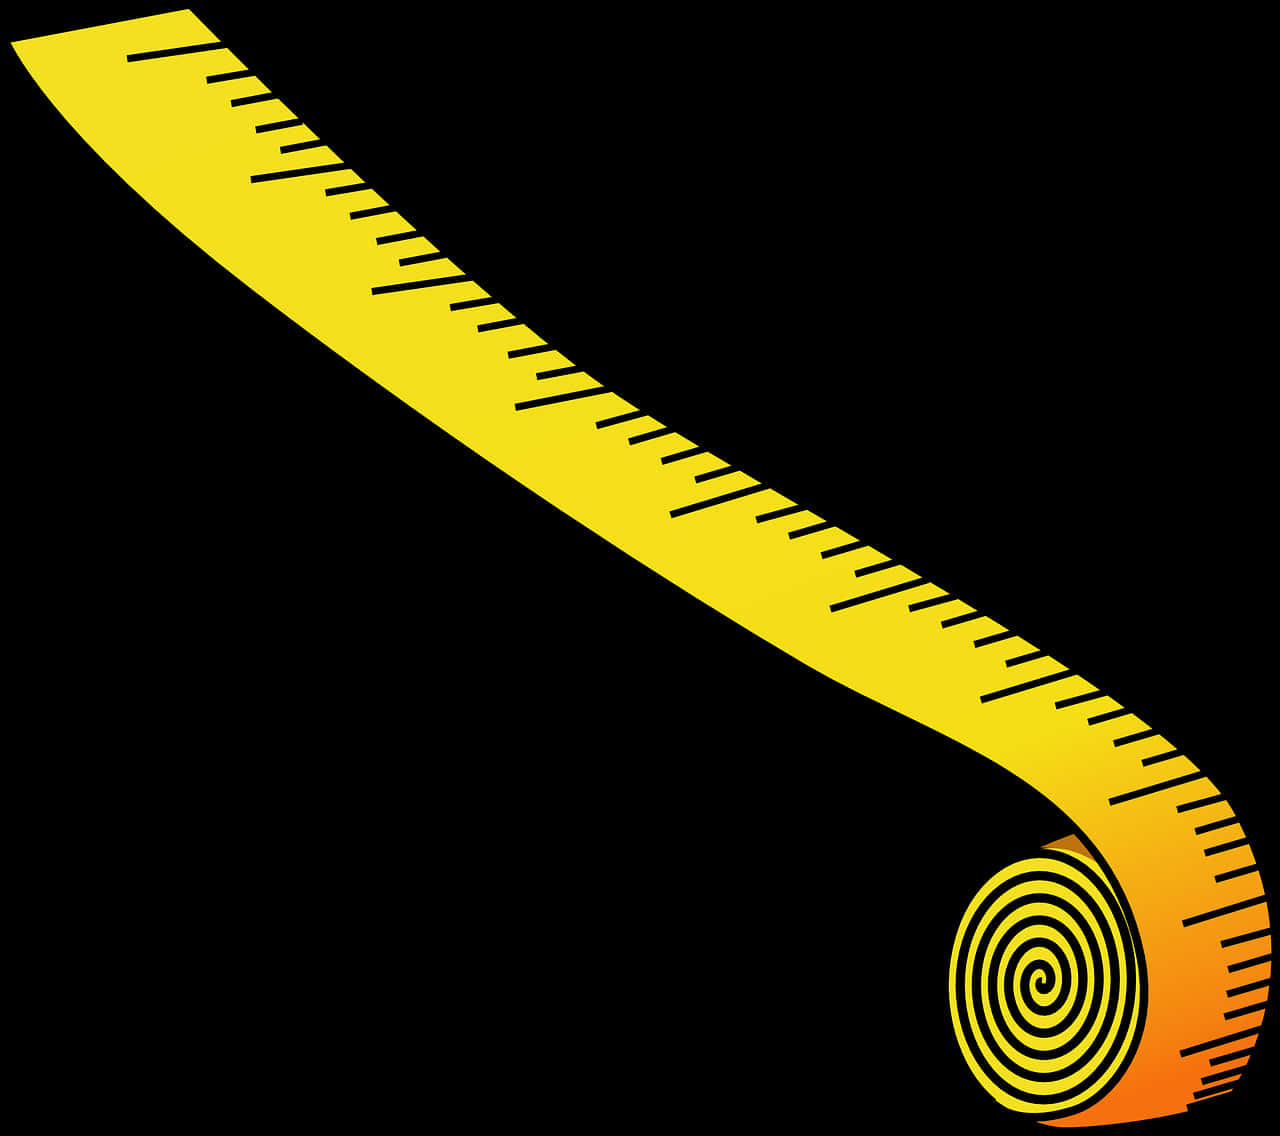 A Yellow Tape Measure On A Black Background